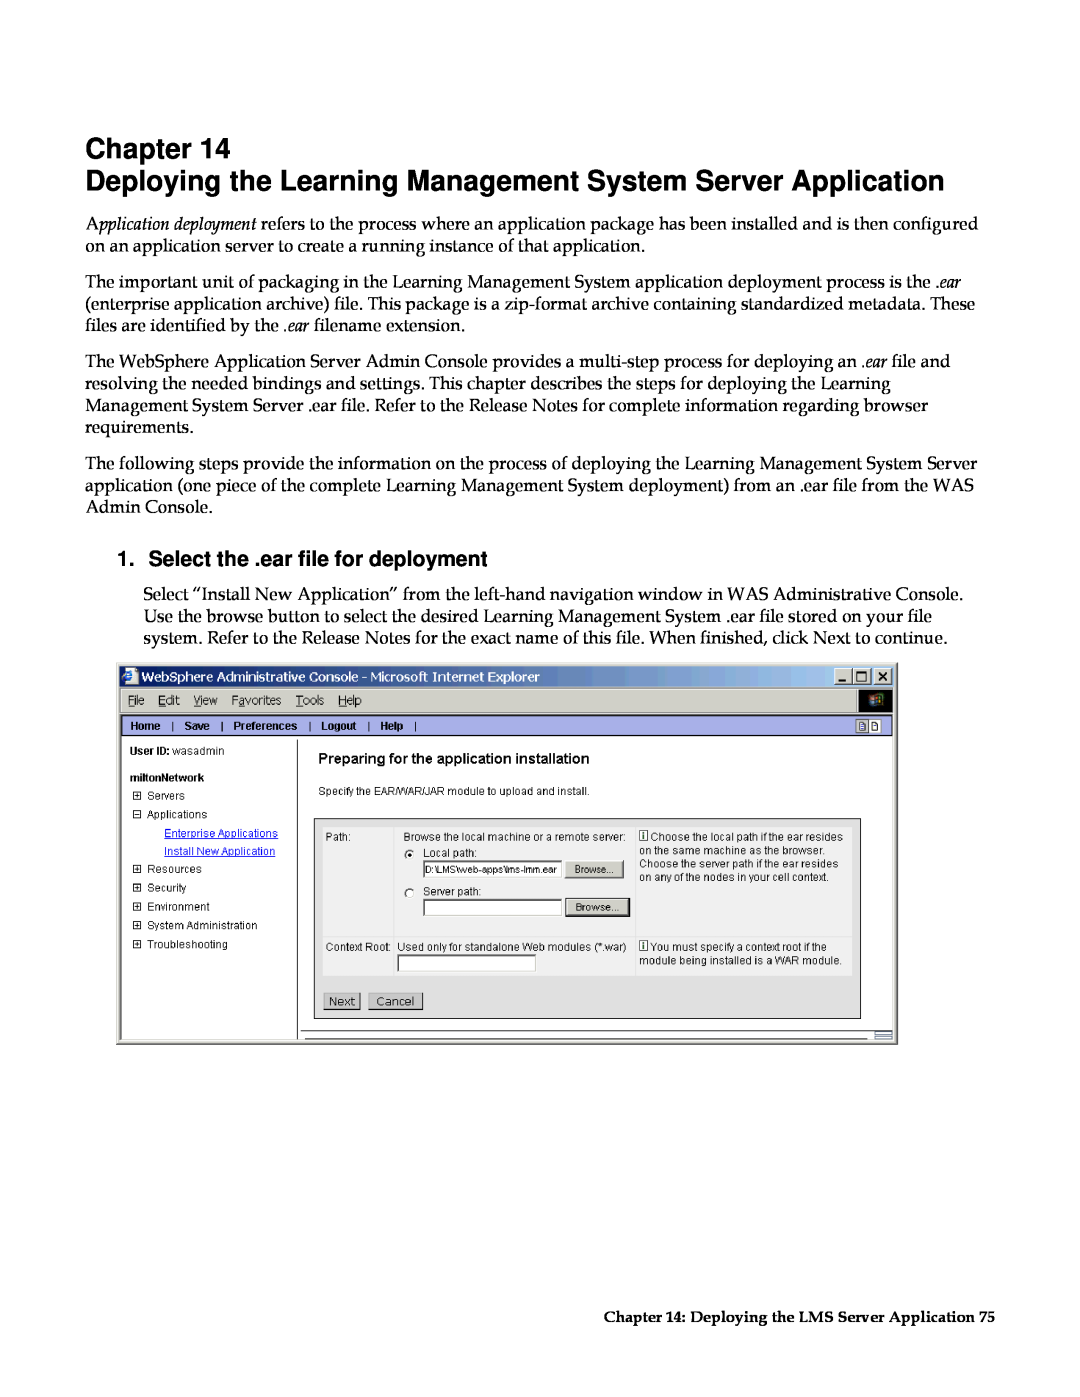 IBM G210-1784-00 Chapter Deploying the Learning Management System Server Application, Select the .ear file for deployment 